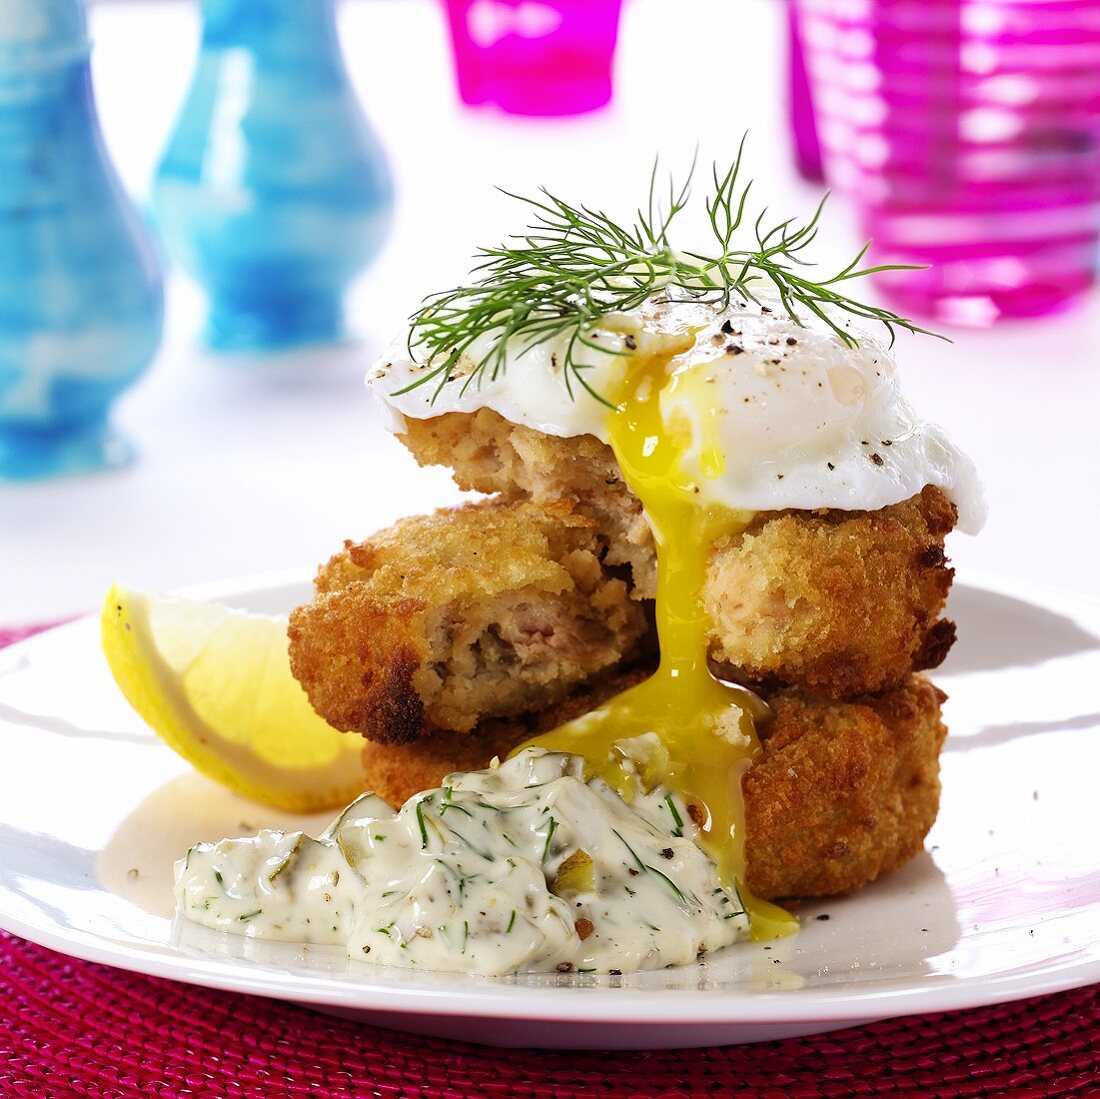 Fish cakes with poached egg and remoulade sauce